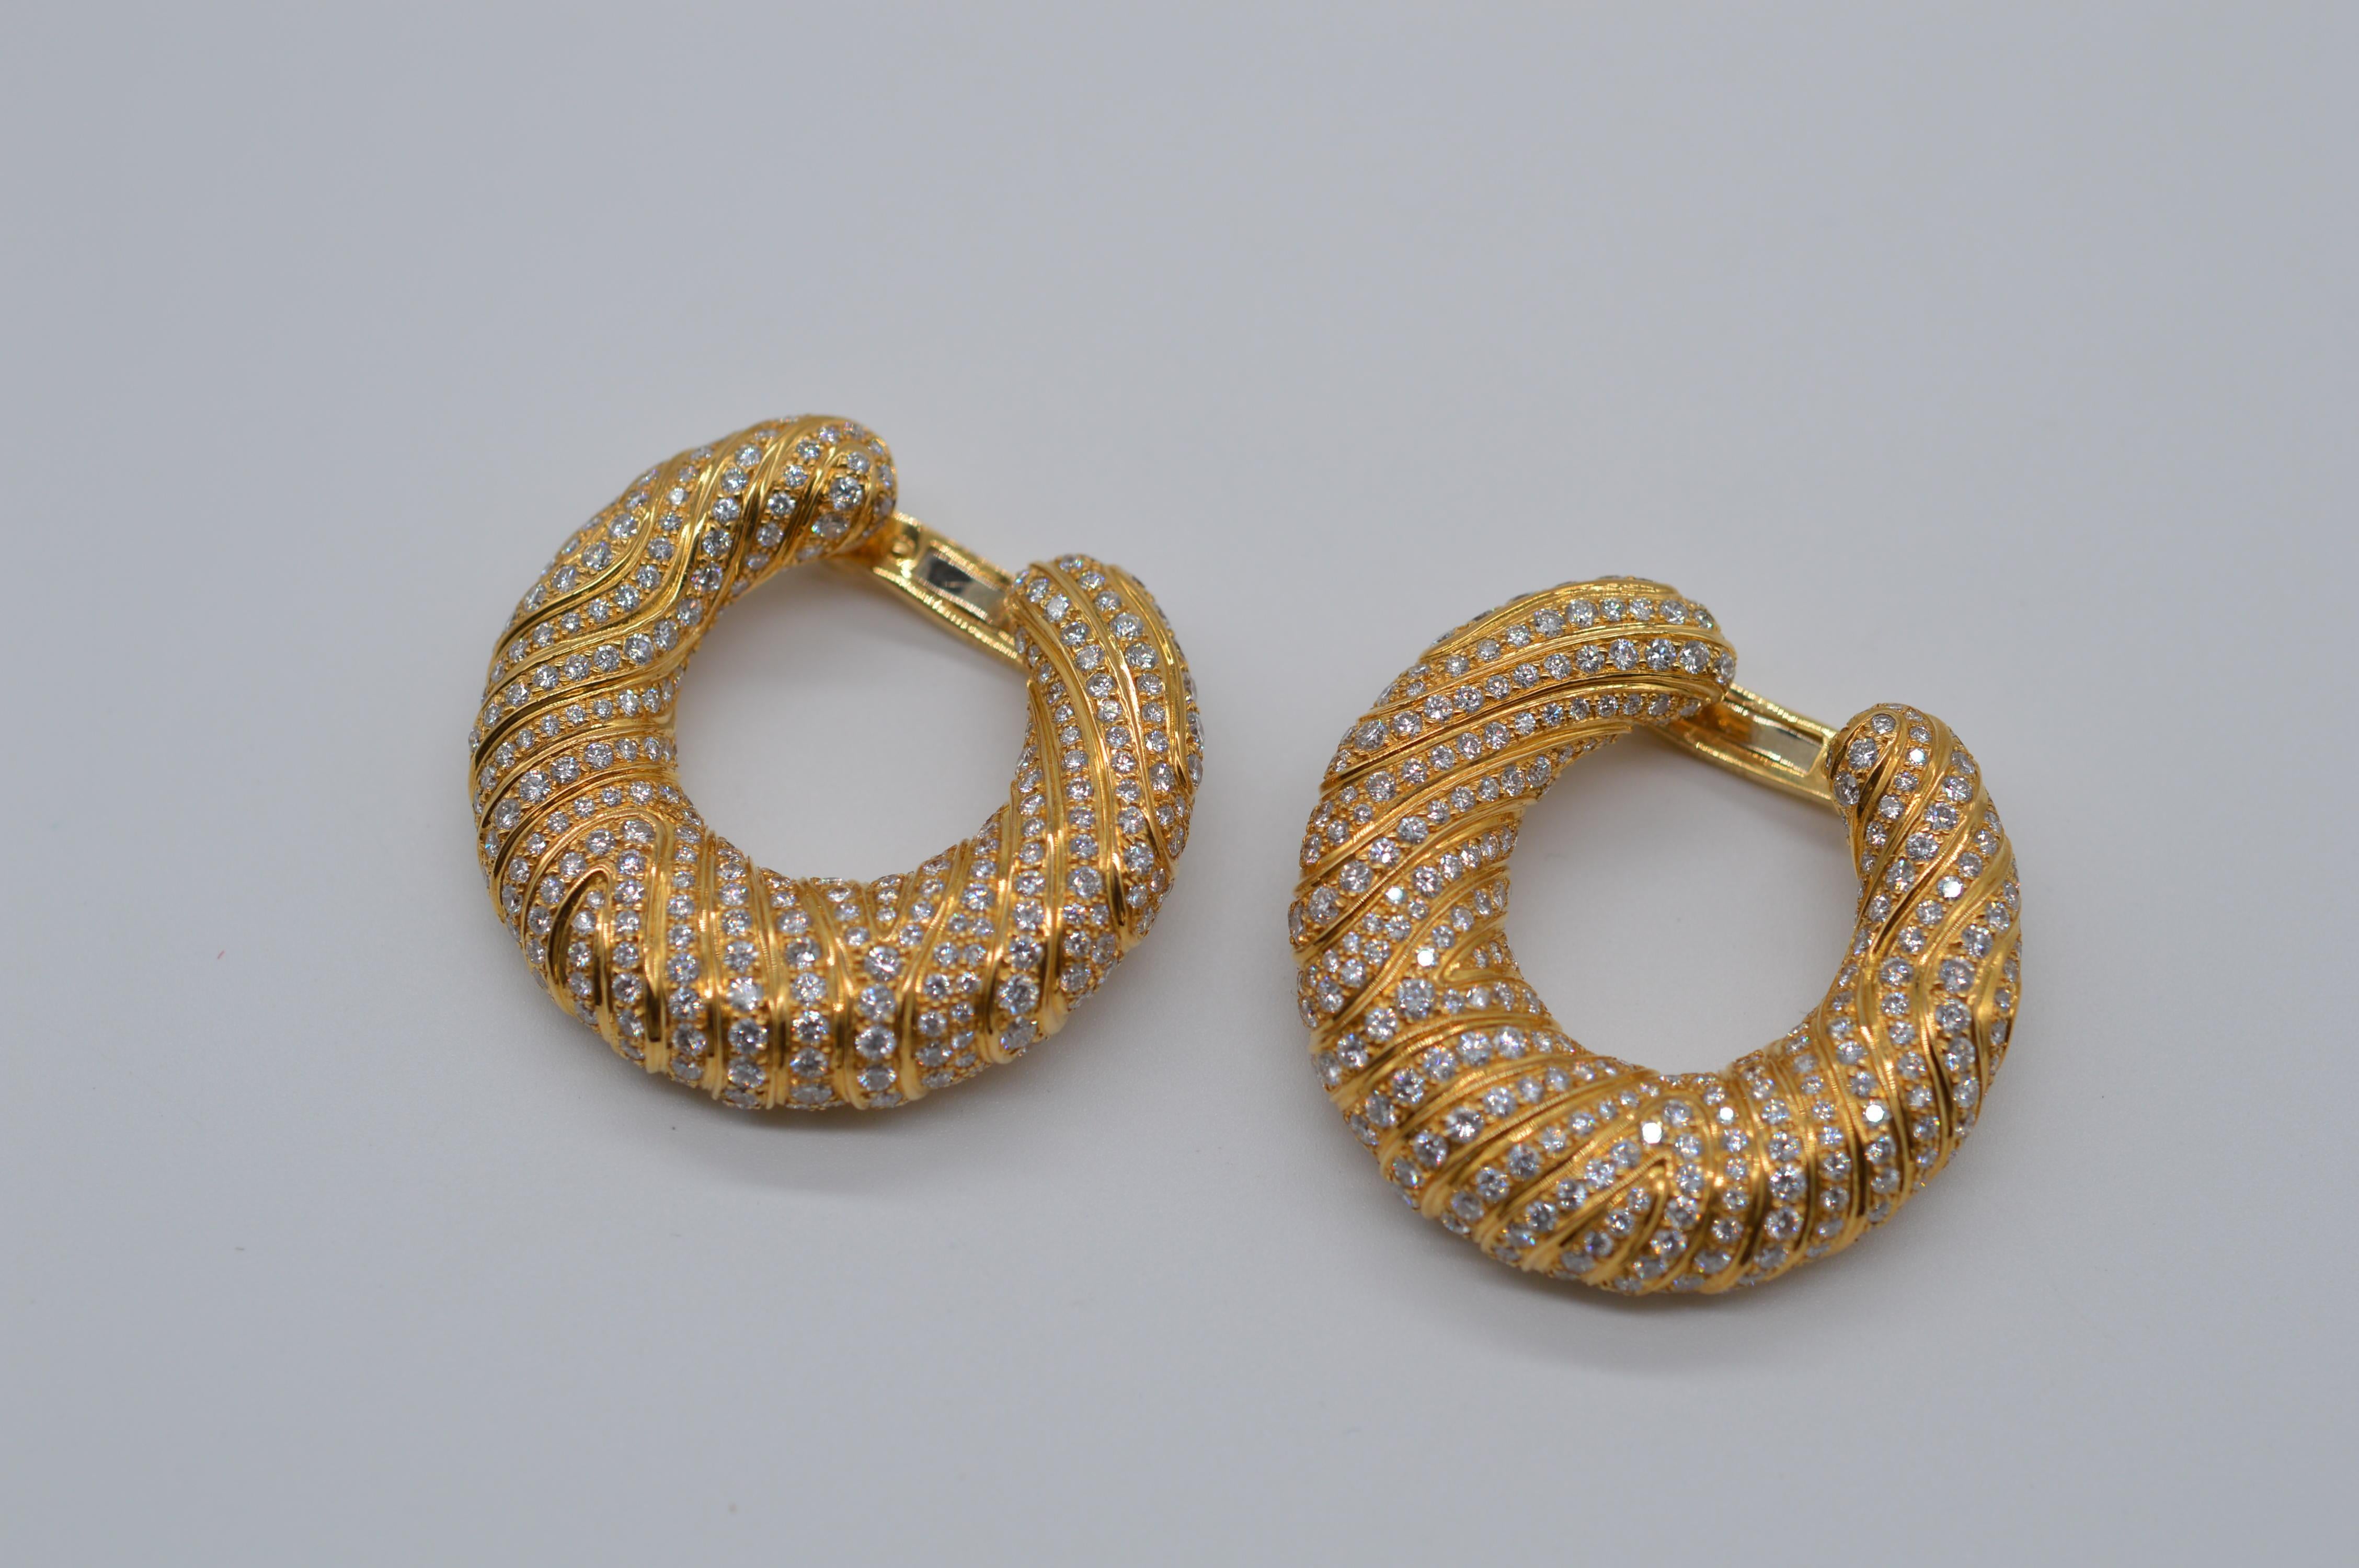 Cartier Hoop Earrings
18K Yellow Gold
Weight 33 grams
Diamond Setting
Set with 580 Diamonds for a approximative weight of 8.70 carats
Vintage unworn condition
With original certificate from Cartier
From 1995